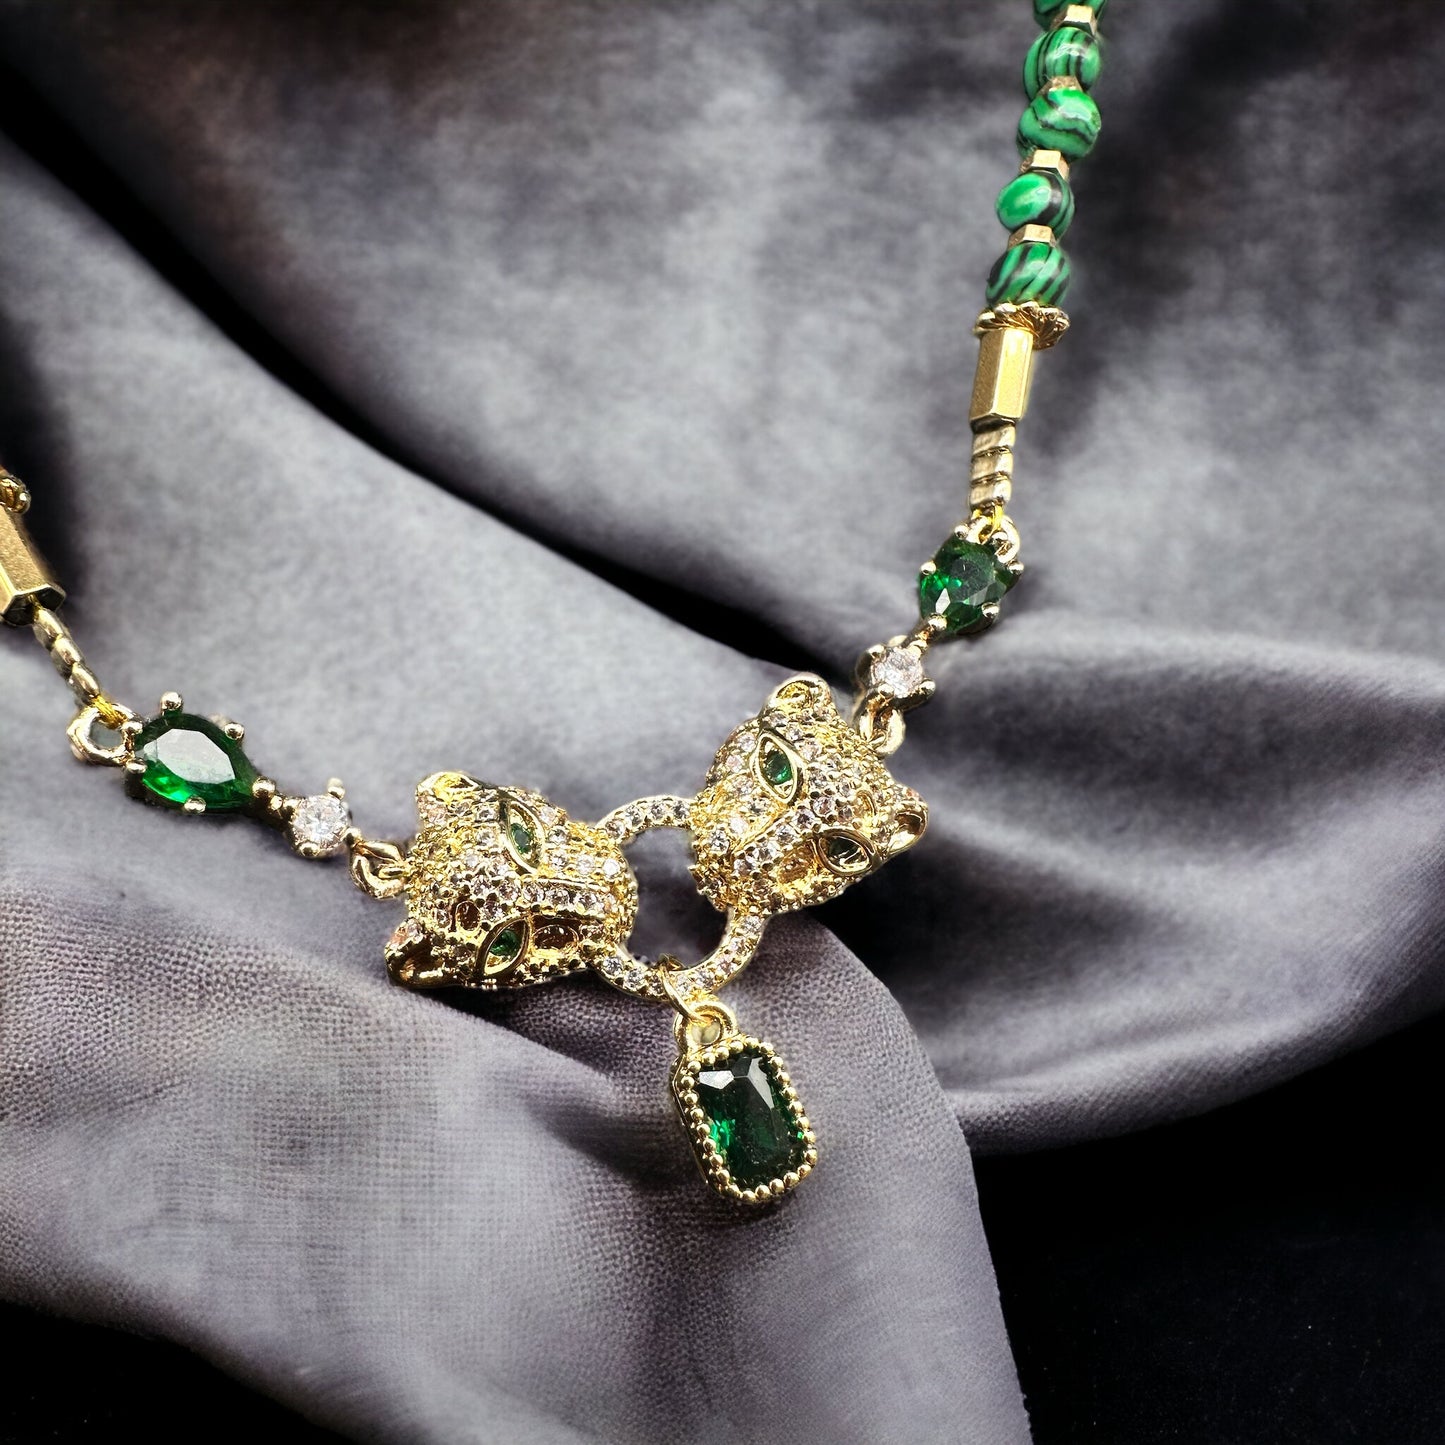 Éclat Nocturne - 18k Gold Plated Leopard necklace with malachite stones and cubic zirconia